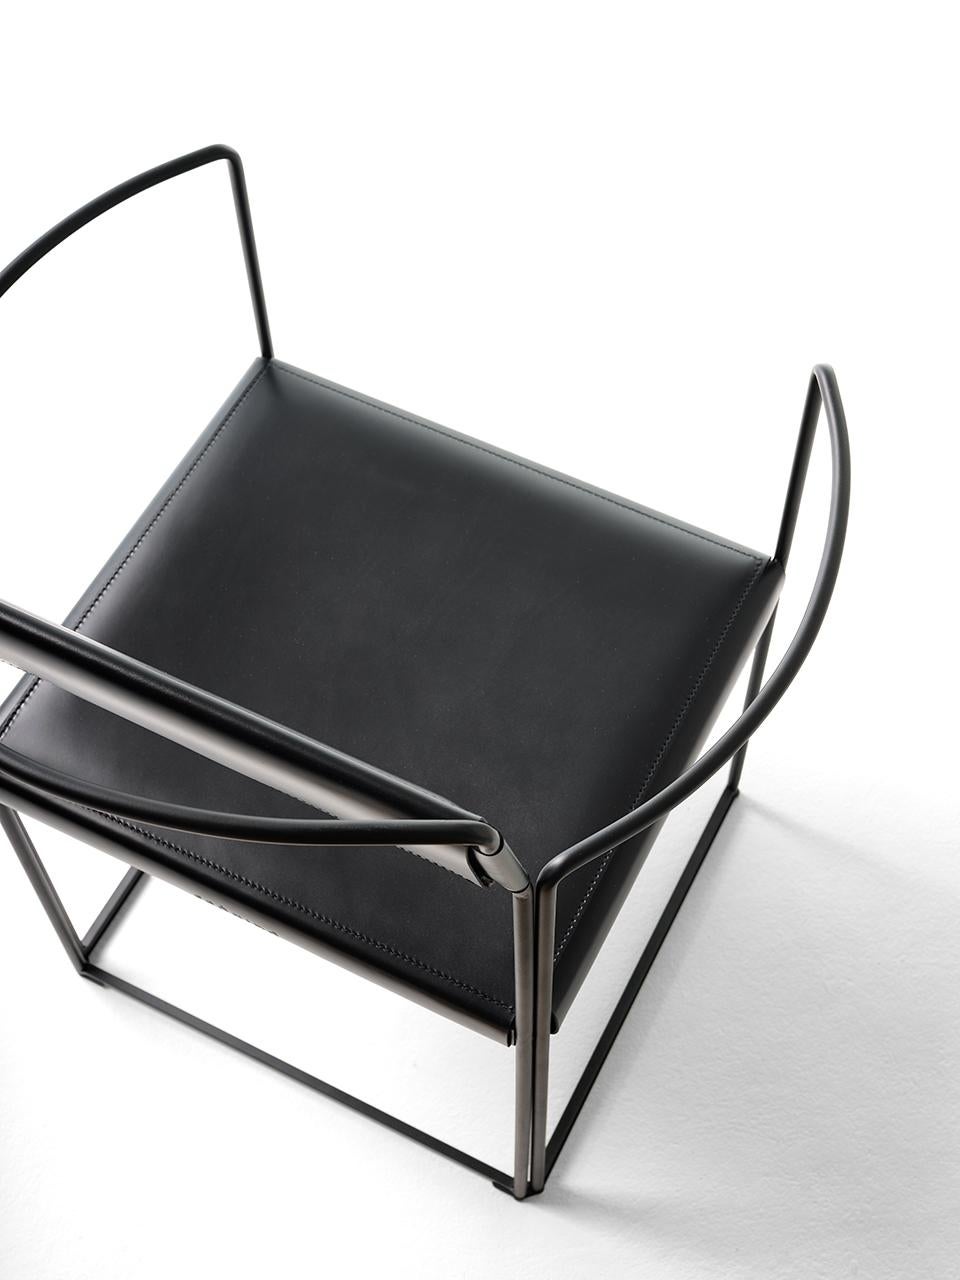 Contemporary 21st Century Modern Chair With Painted Steel Structure And Hide Leather Seat For Sale